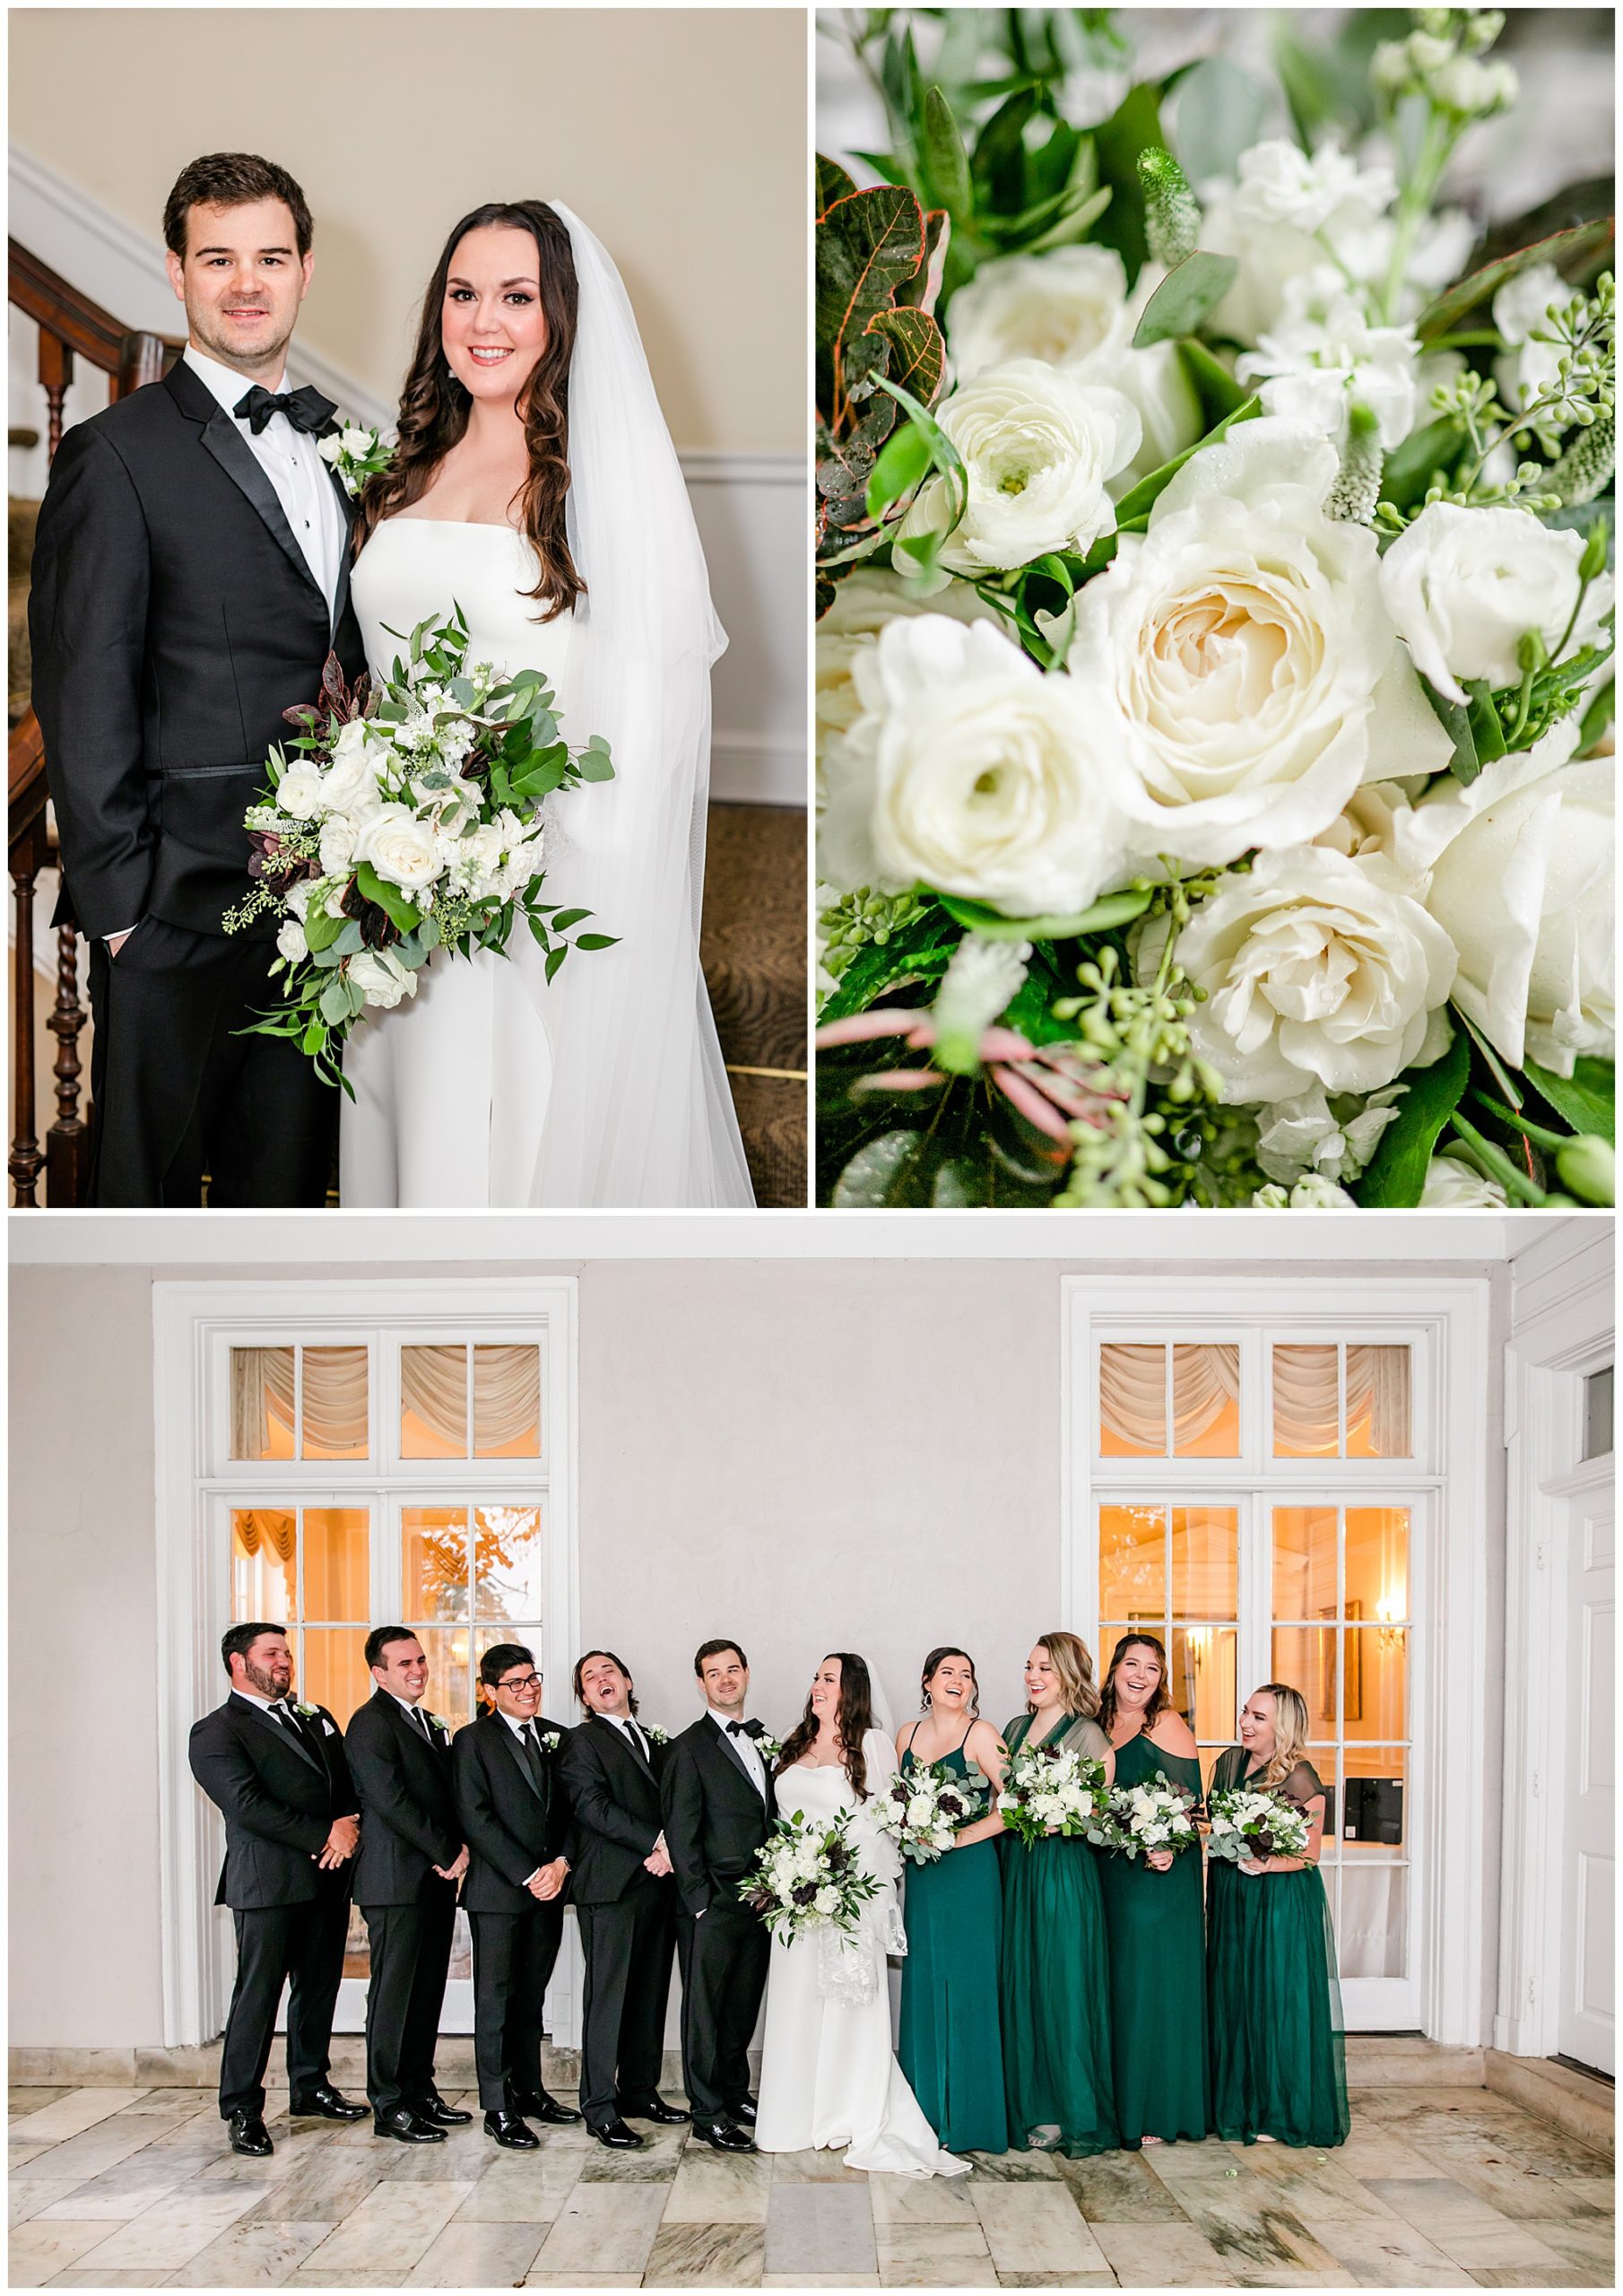 emerald and ivory Woodend Sanctuary wedding, autumn Woodend Sanctuary wedding, rainy day wedding, Maryland wedding venues, Chevy Chase MD wedding venue, mansion wedding, manor house wedding, indoor wedding, DC wedding venue, DC wedding photographer, Baltimore wedding photographer, Rachel E.H. Photography, emerald and ivory aesthetic, bride and groom with wedding party, white wedding bouquet, Flowers at 38